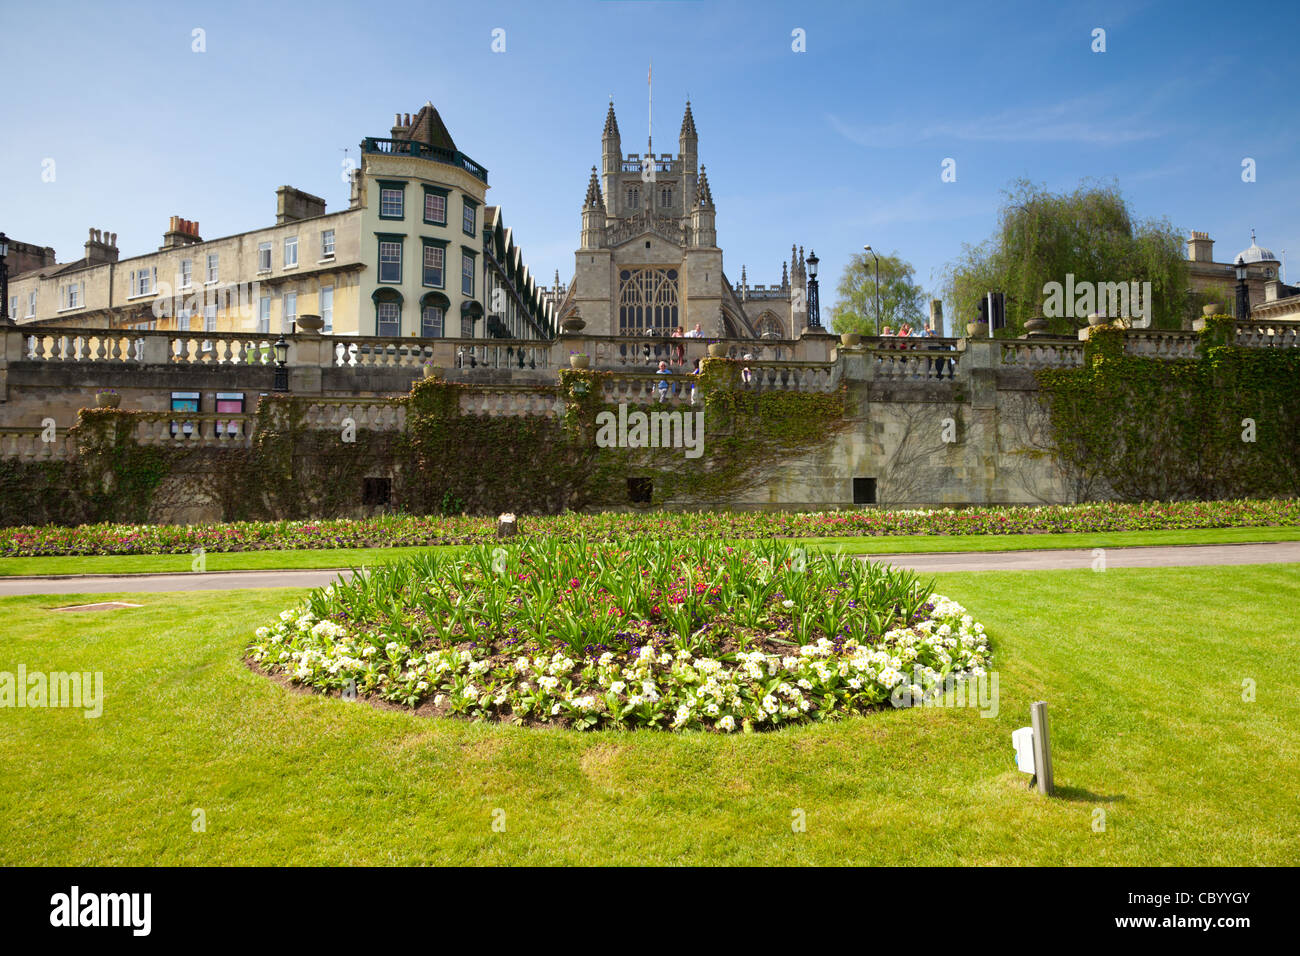 Formal flower bed in Parade Gardens, with Bath Abbey and The Orangerie, on a beautiful spring day. Stock Photo